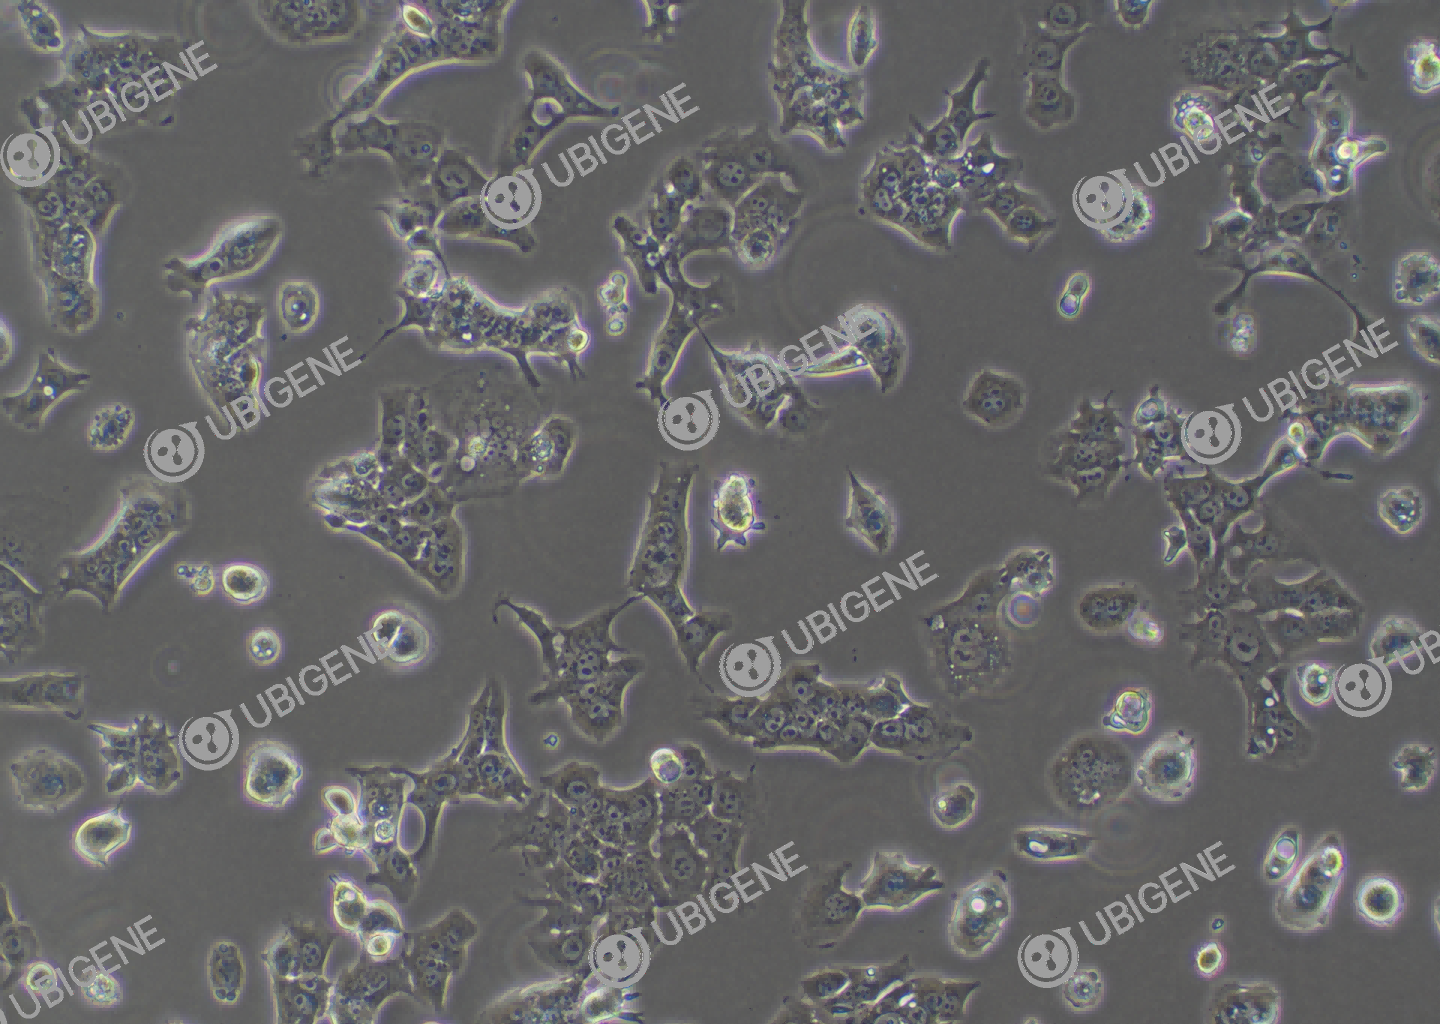 Hepa 1-6 cell line Cultured cell morphology